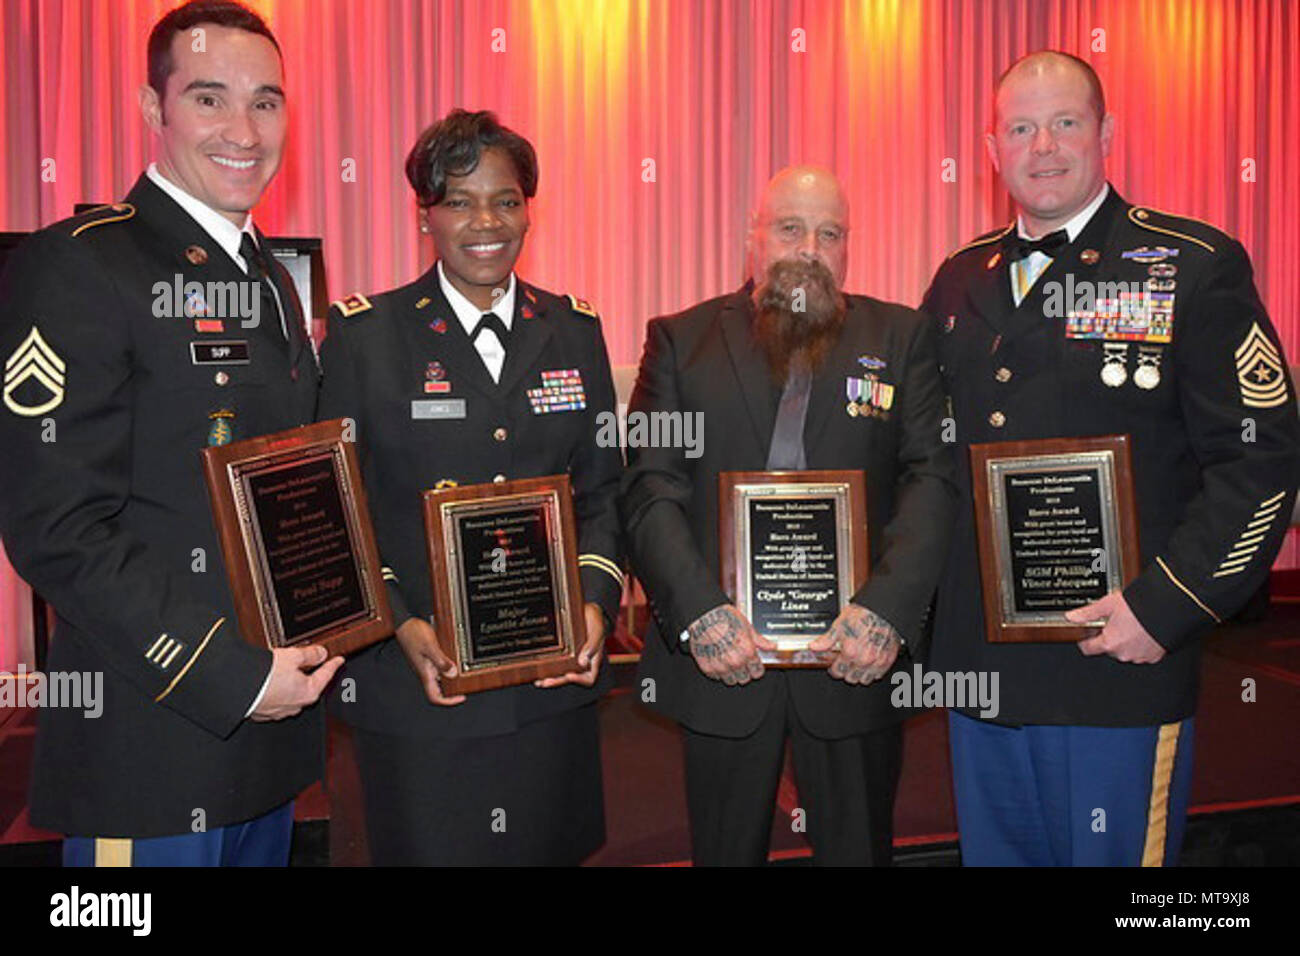 Veterans were recognized with the Hero Award at a gala event sponsored by Suzanne DeLaurentiis Productions at the InterContinental Hotel in Burbank, California, March 3, 2018. Pictured from left: Staff Sgt. Paul Supp; Maj. Lynette Jones; Vietnam Veteran Clyde “George” Lines; and Oregon Army National Guard Sgt. Maj. Vinnie Jacques (right), Senior Enlisted Advisor to Joint Domestic Operations Commander. Jacques was a former platoon sergeant with 3rd Platoon, Bravo Company, 2nd Battalion, 162nd Infantry Regiment, which received the Presidential Unit Citation for their heroic efforts during some o Stock Photo